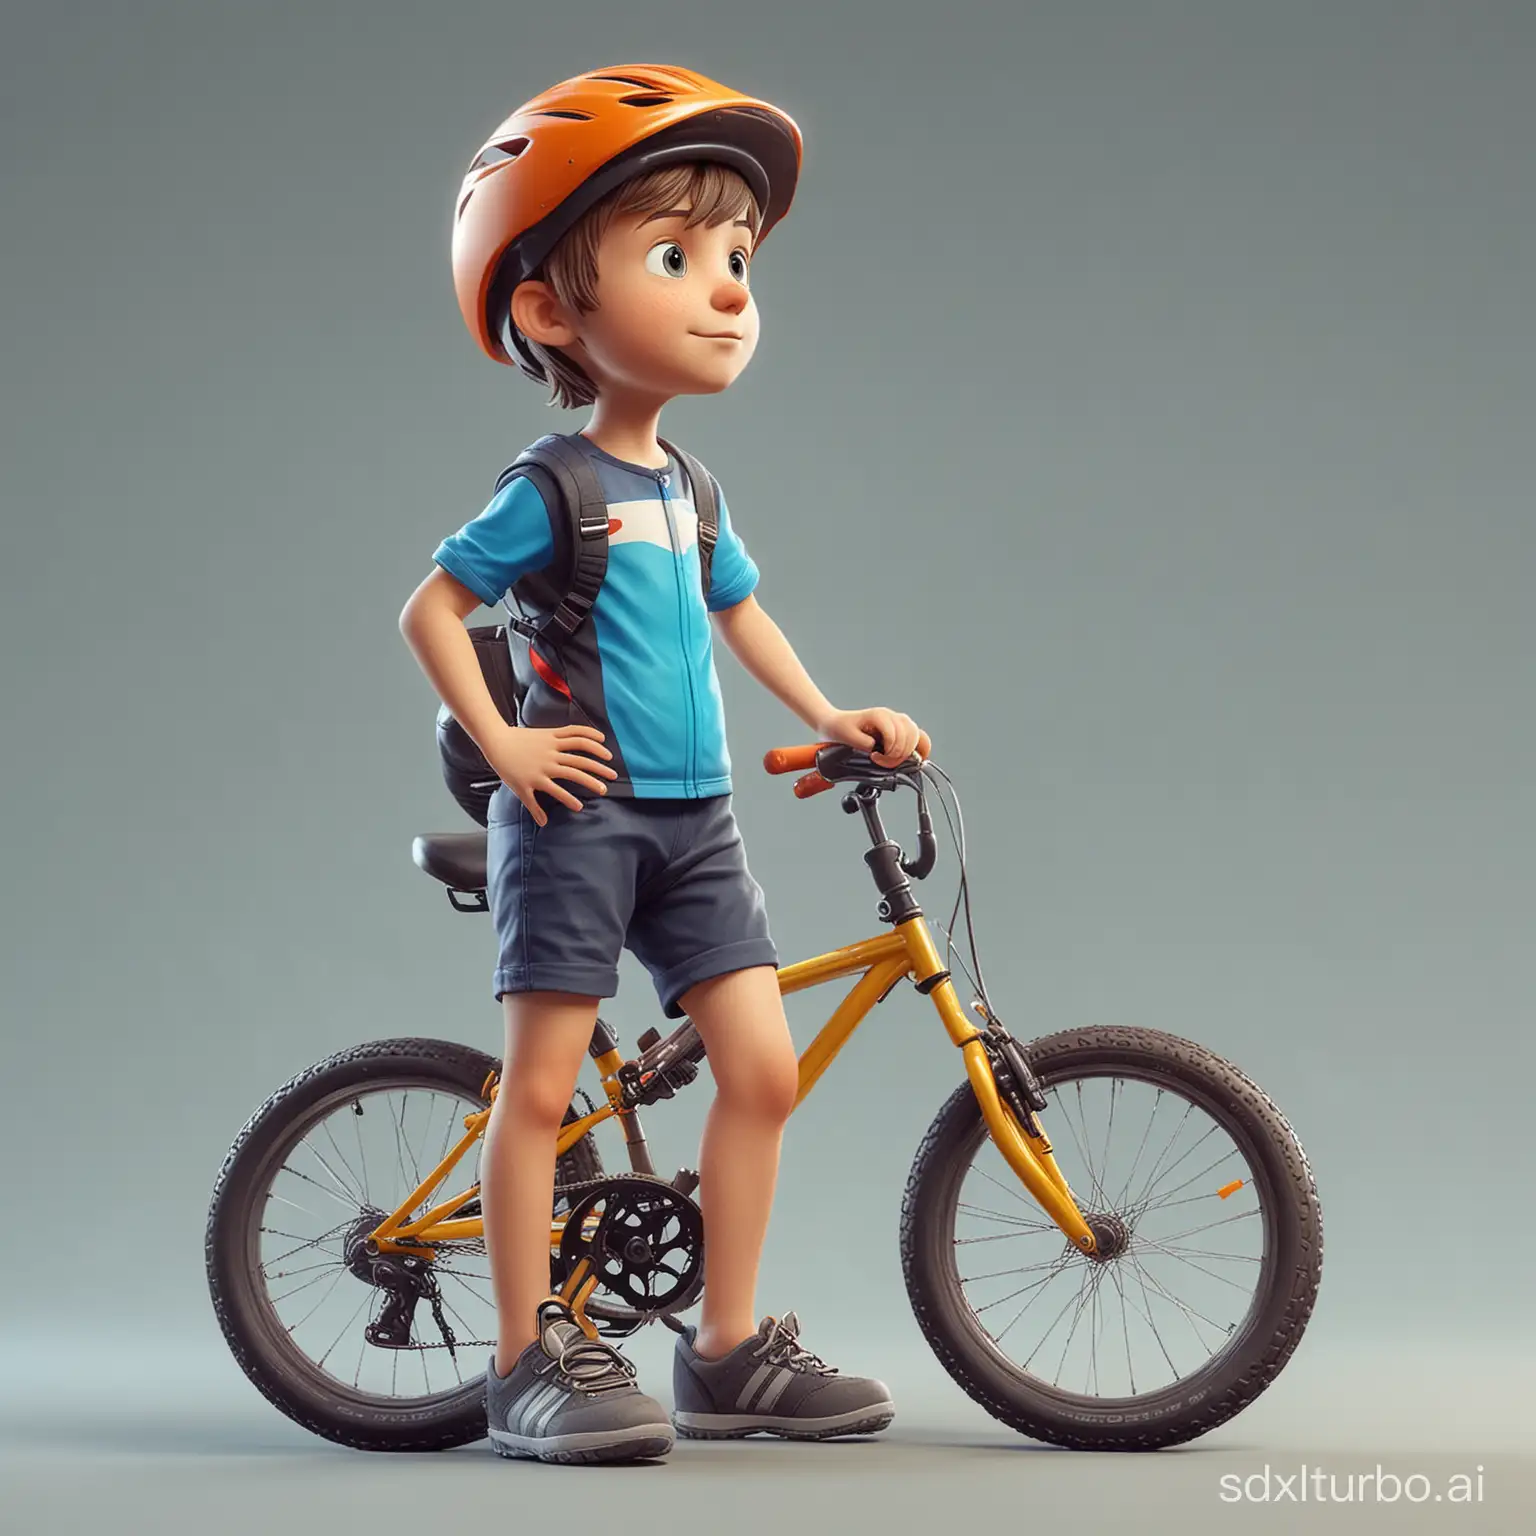 Adorable-Child-Cyclist-Boy-Standing-Tall-as-a-Game-Character